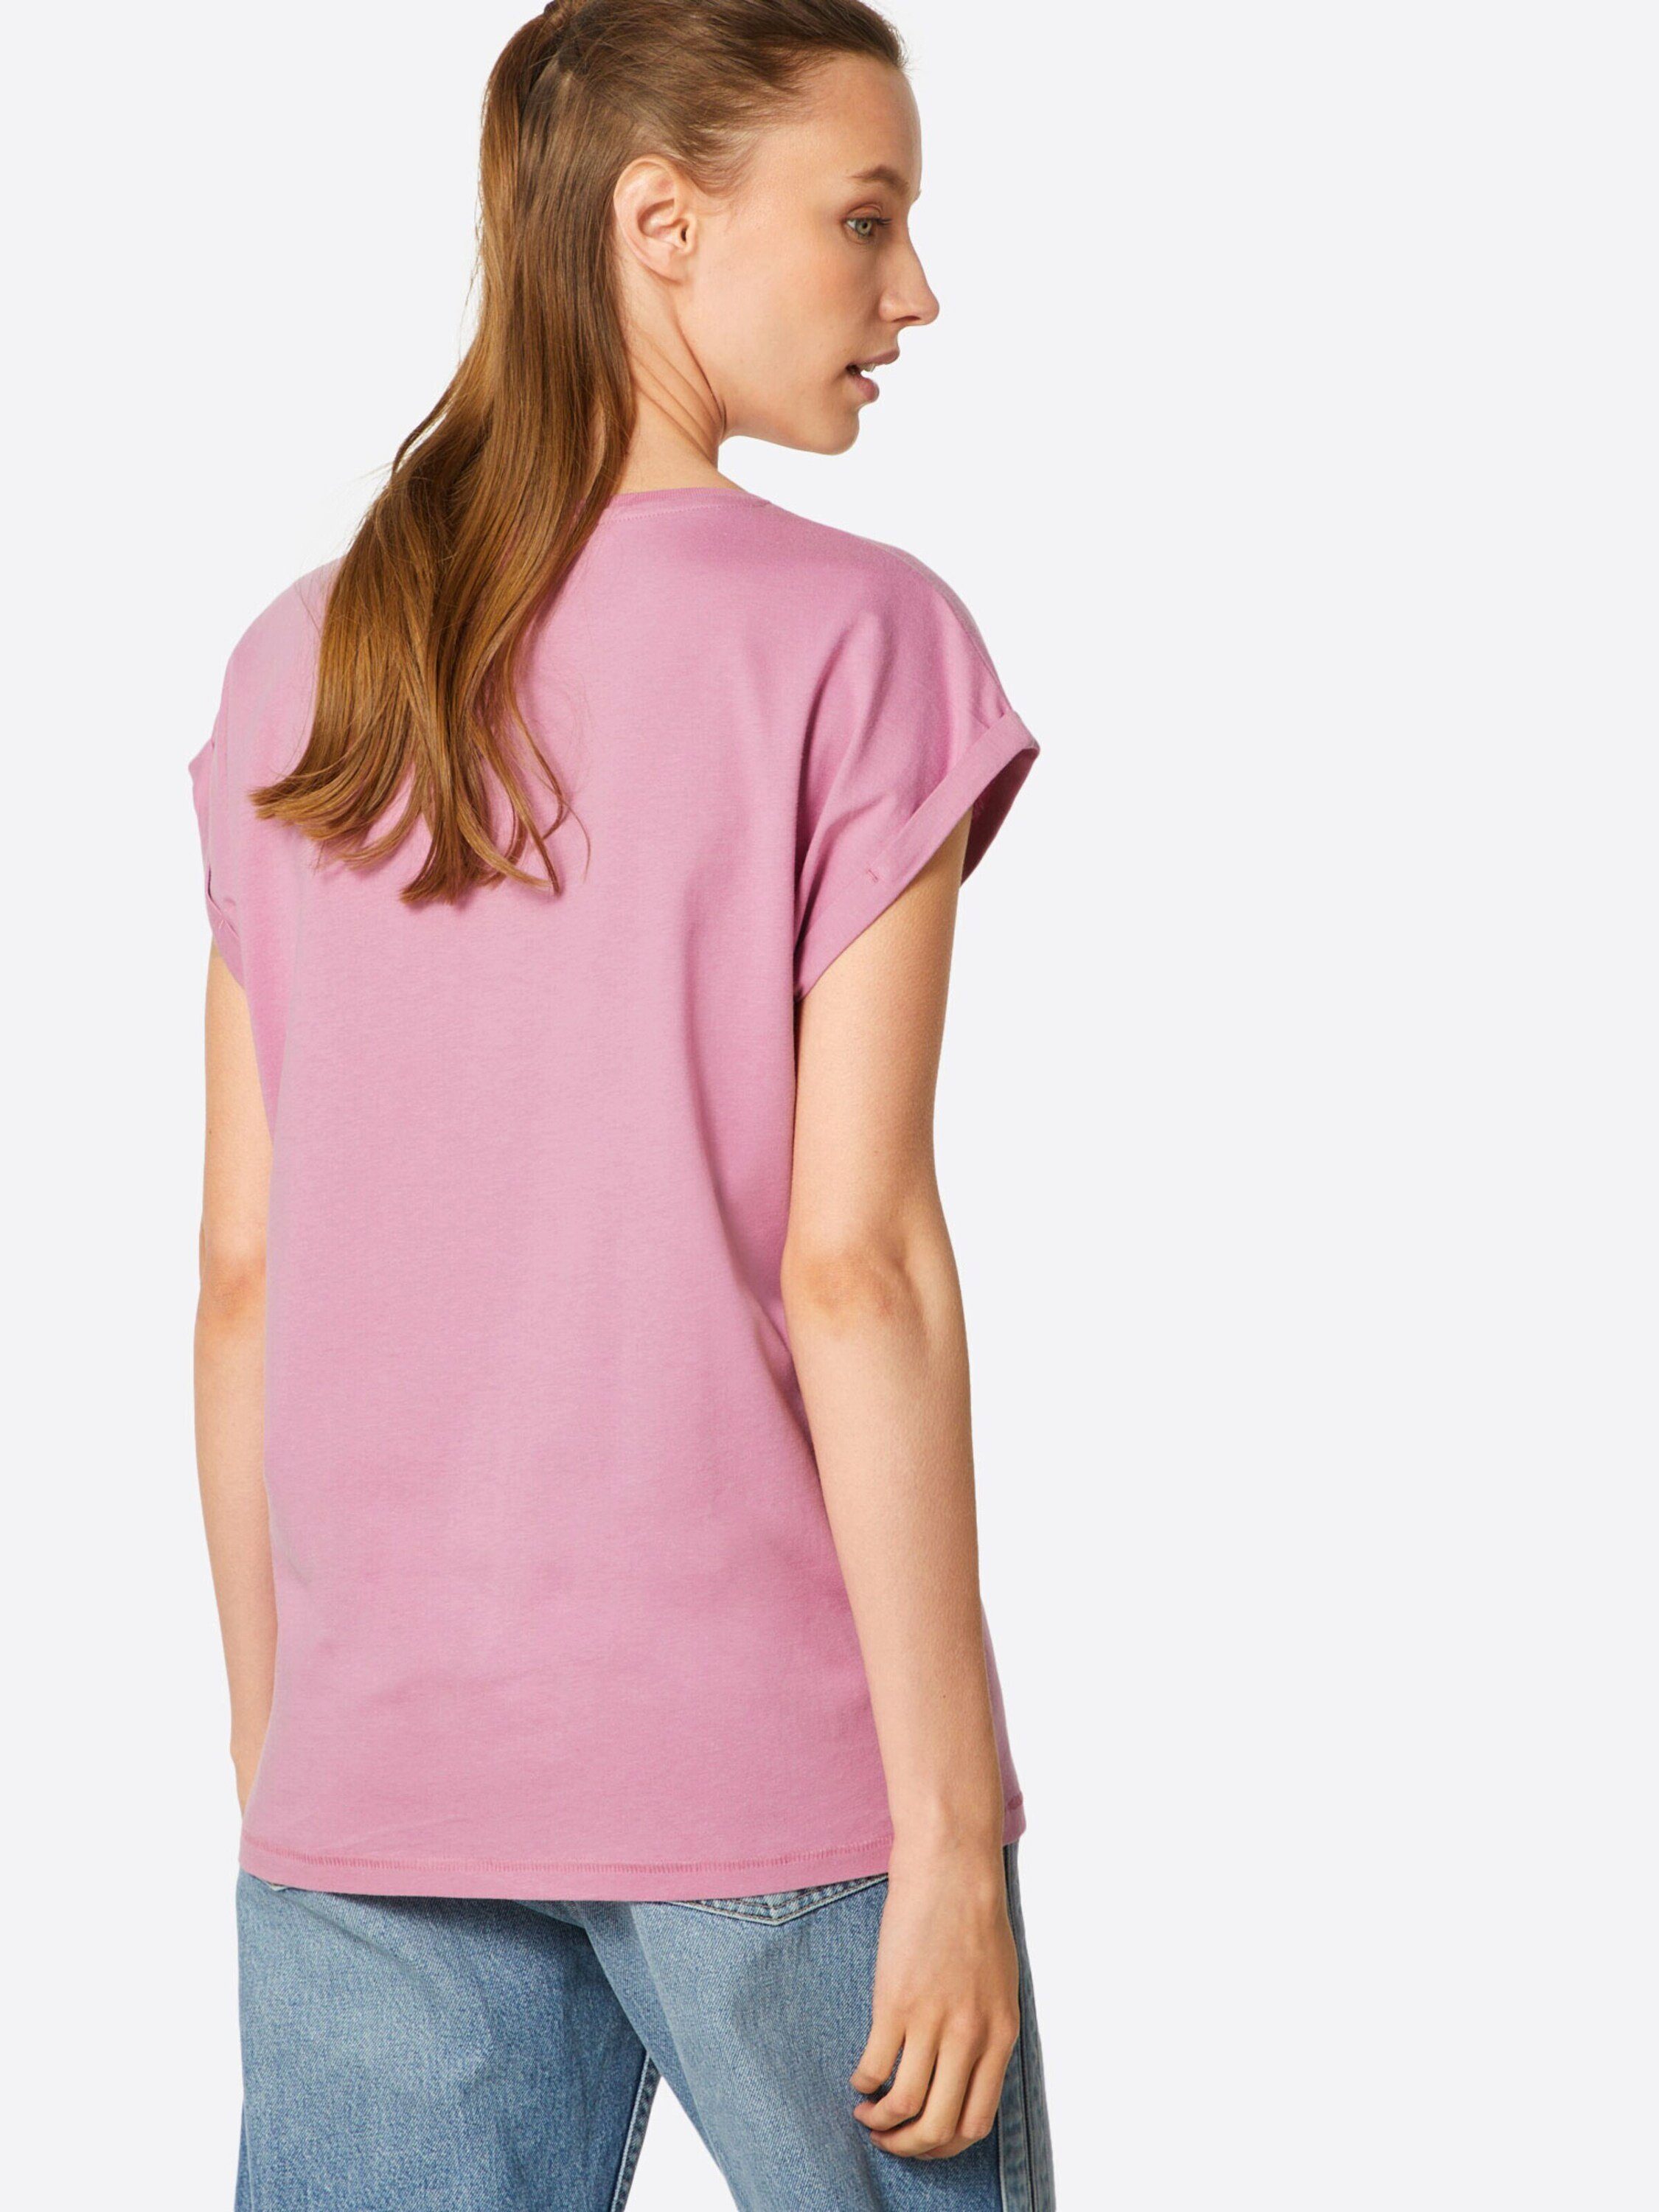 CLASSICS Weiteres URBAN (1-tlg) Extended Plain/ohne TB771 Detail T-Shirt Details, coolpink Shoulder